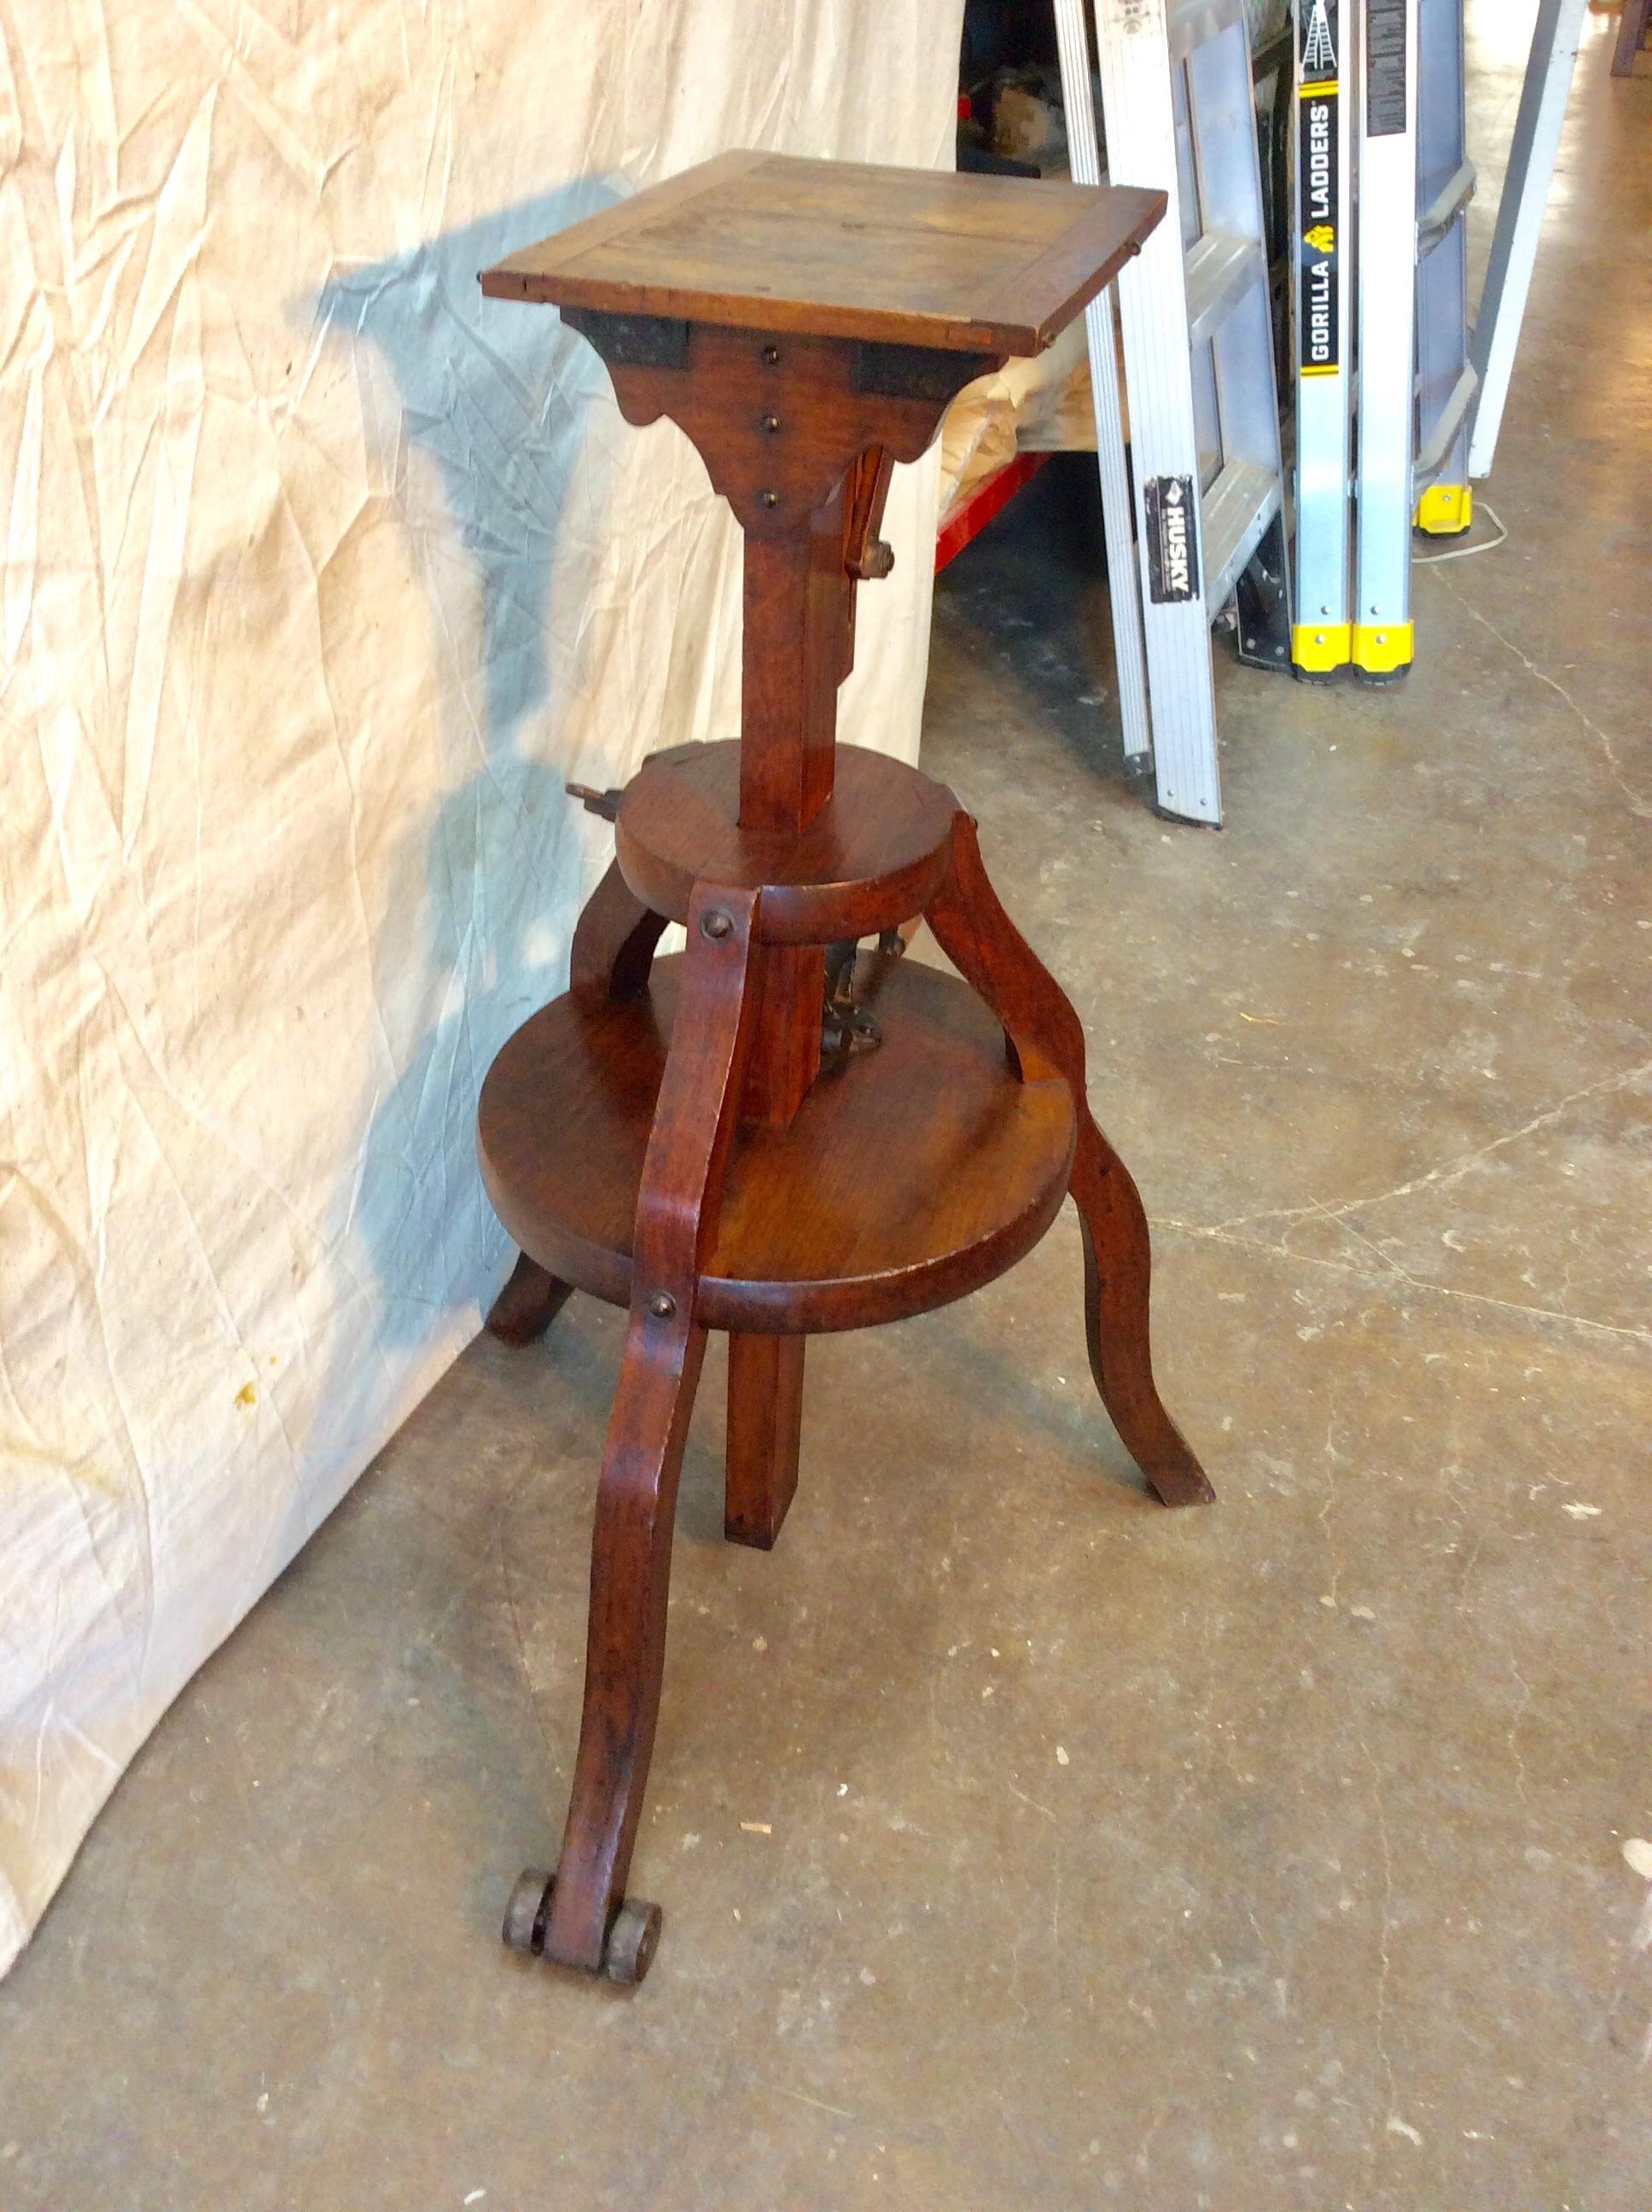 Found in the South of France this Early 1800s French Walnut Camera Stand is in good working condition. The piece features three curved legs which support a wood handled iron crank system to adjust the height of the stand. There is an iron wheel on